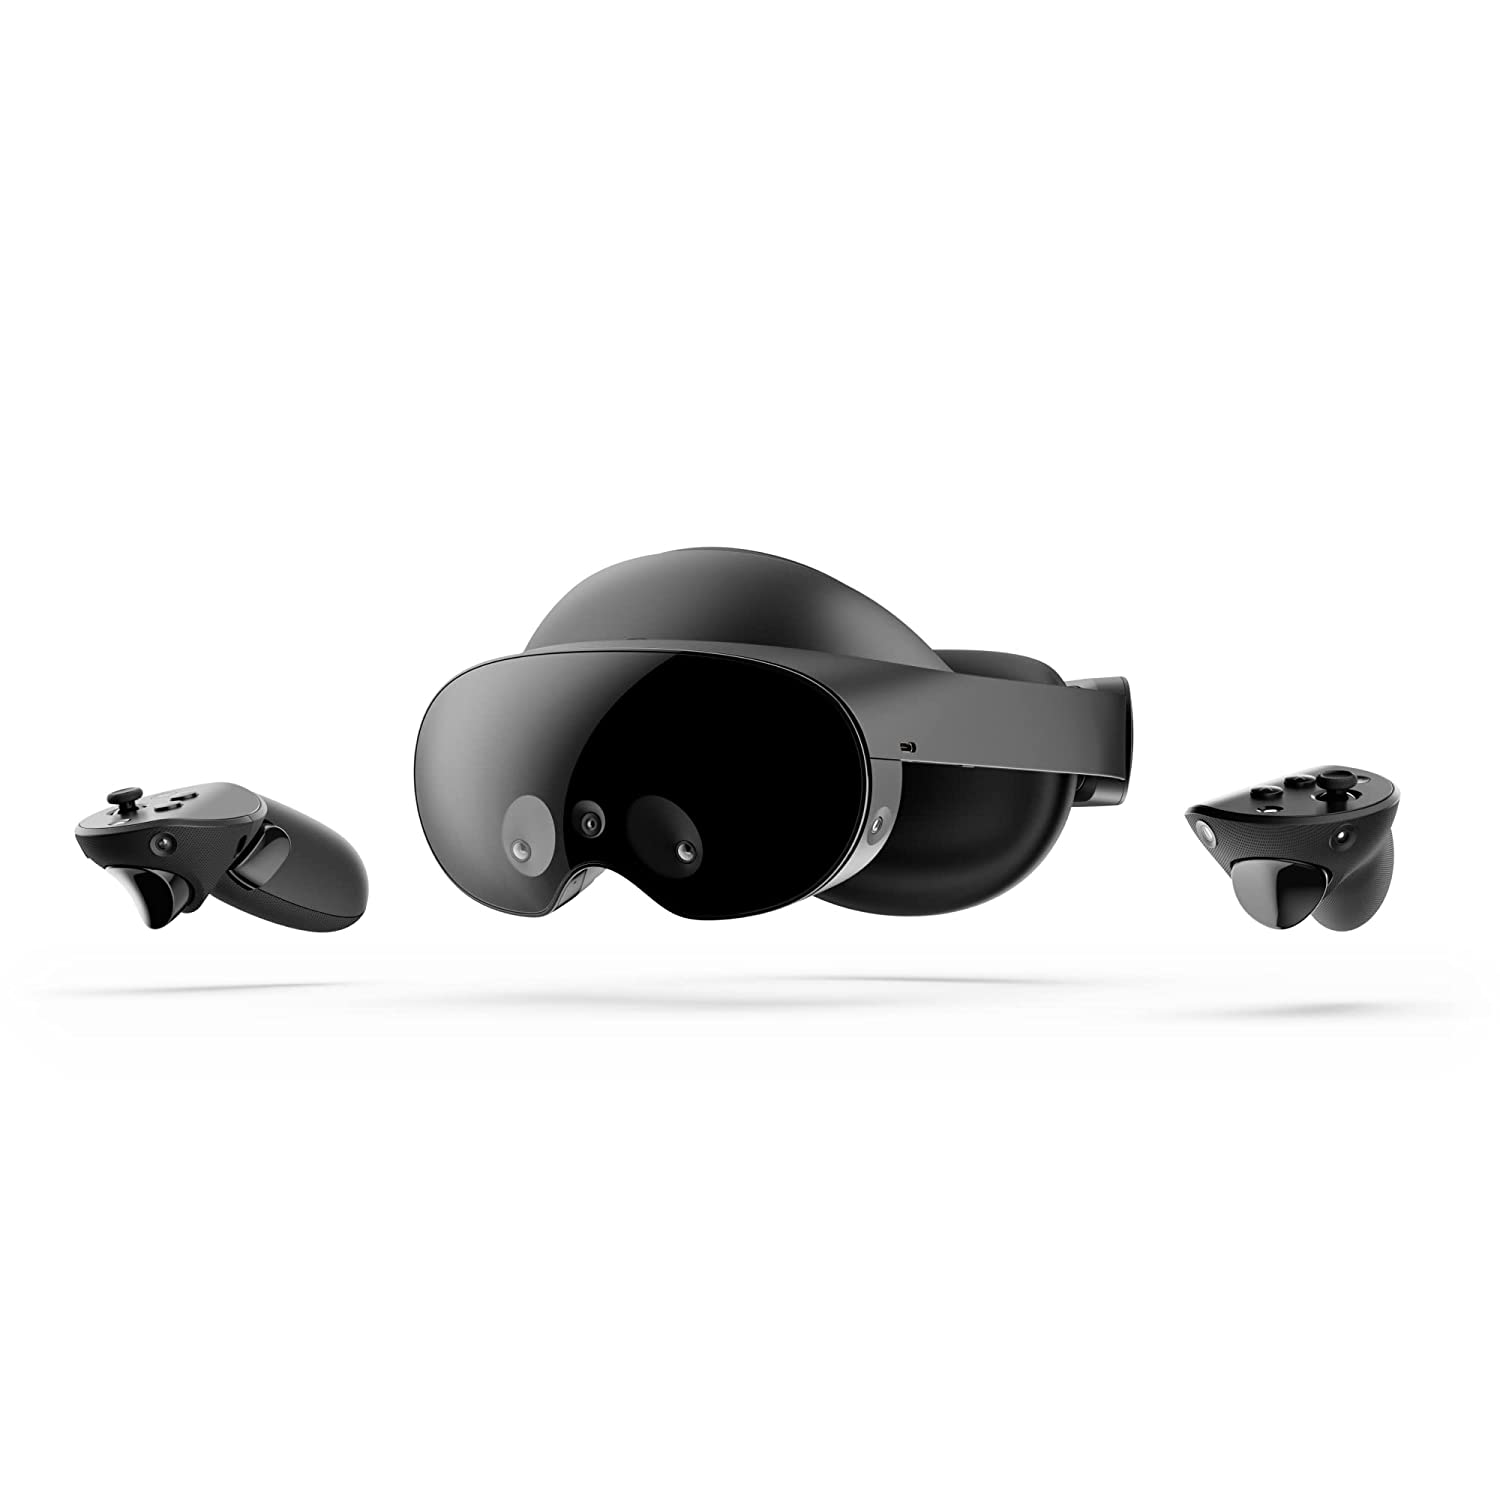 SmartTechShopping VR Headset Quest Pro System Meta Quest Pro Quest Pro System